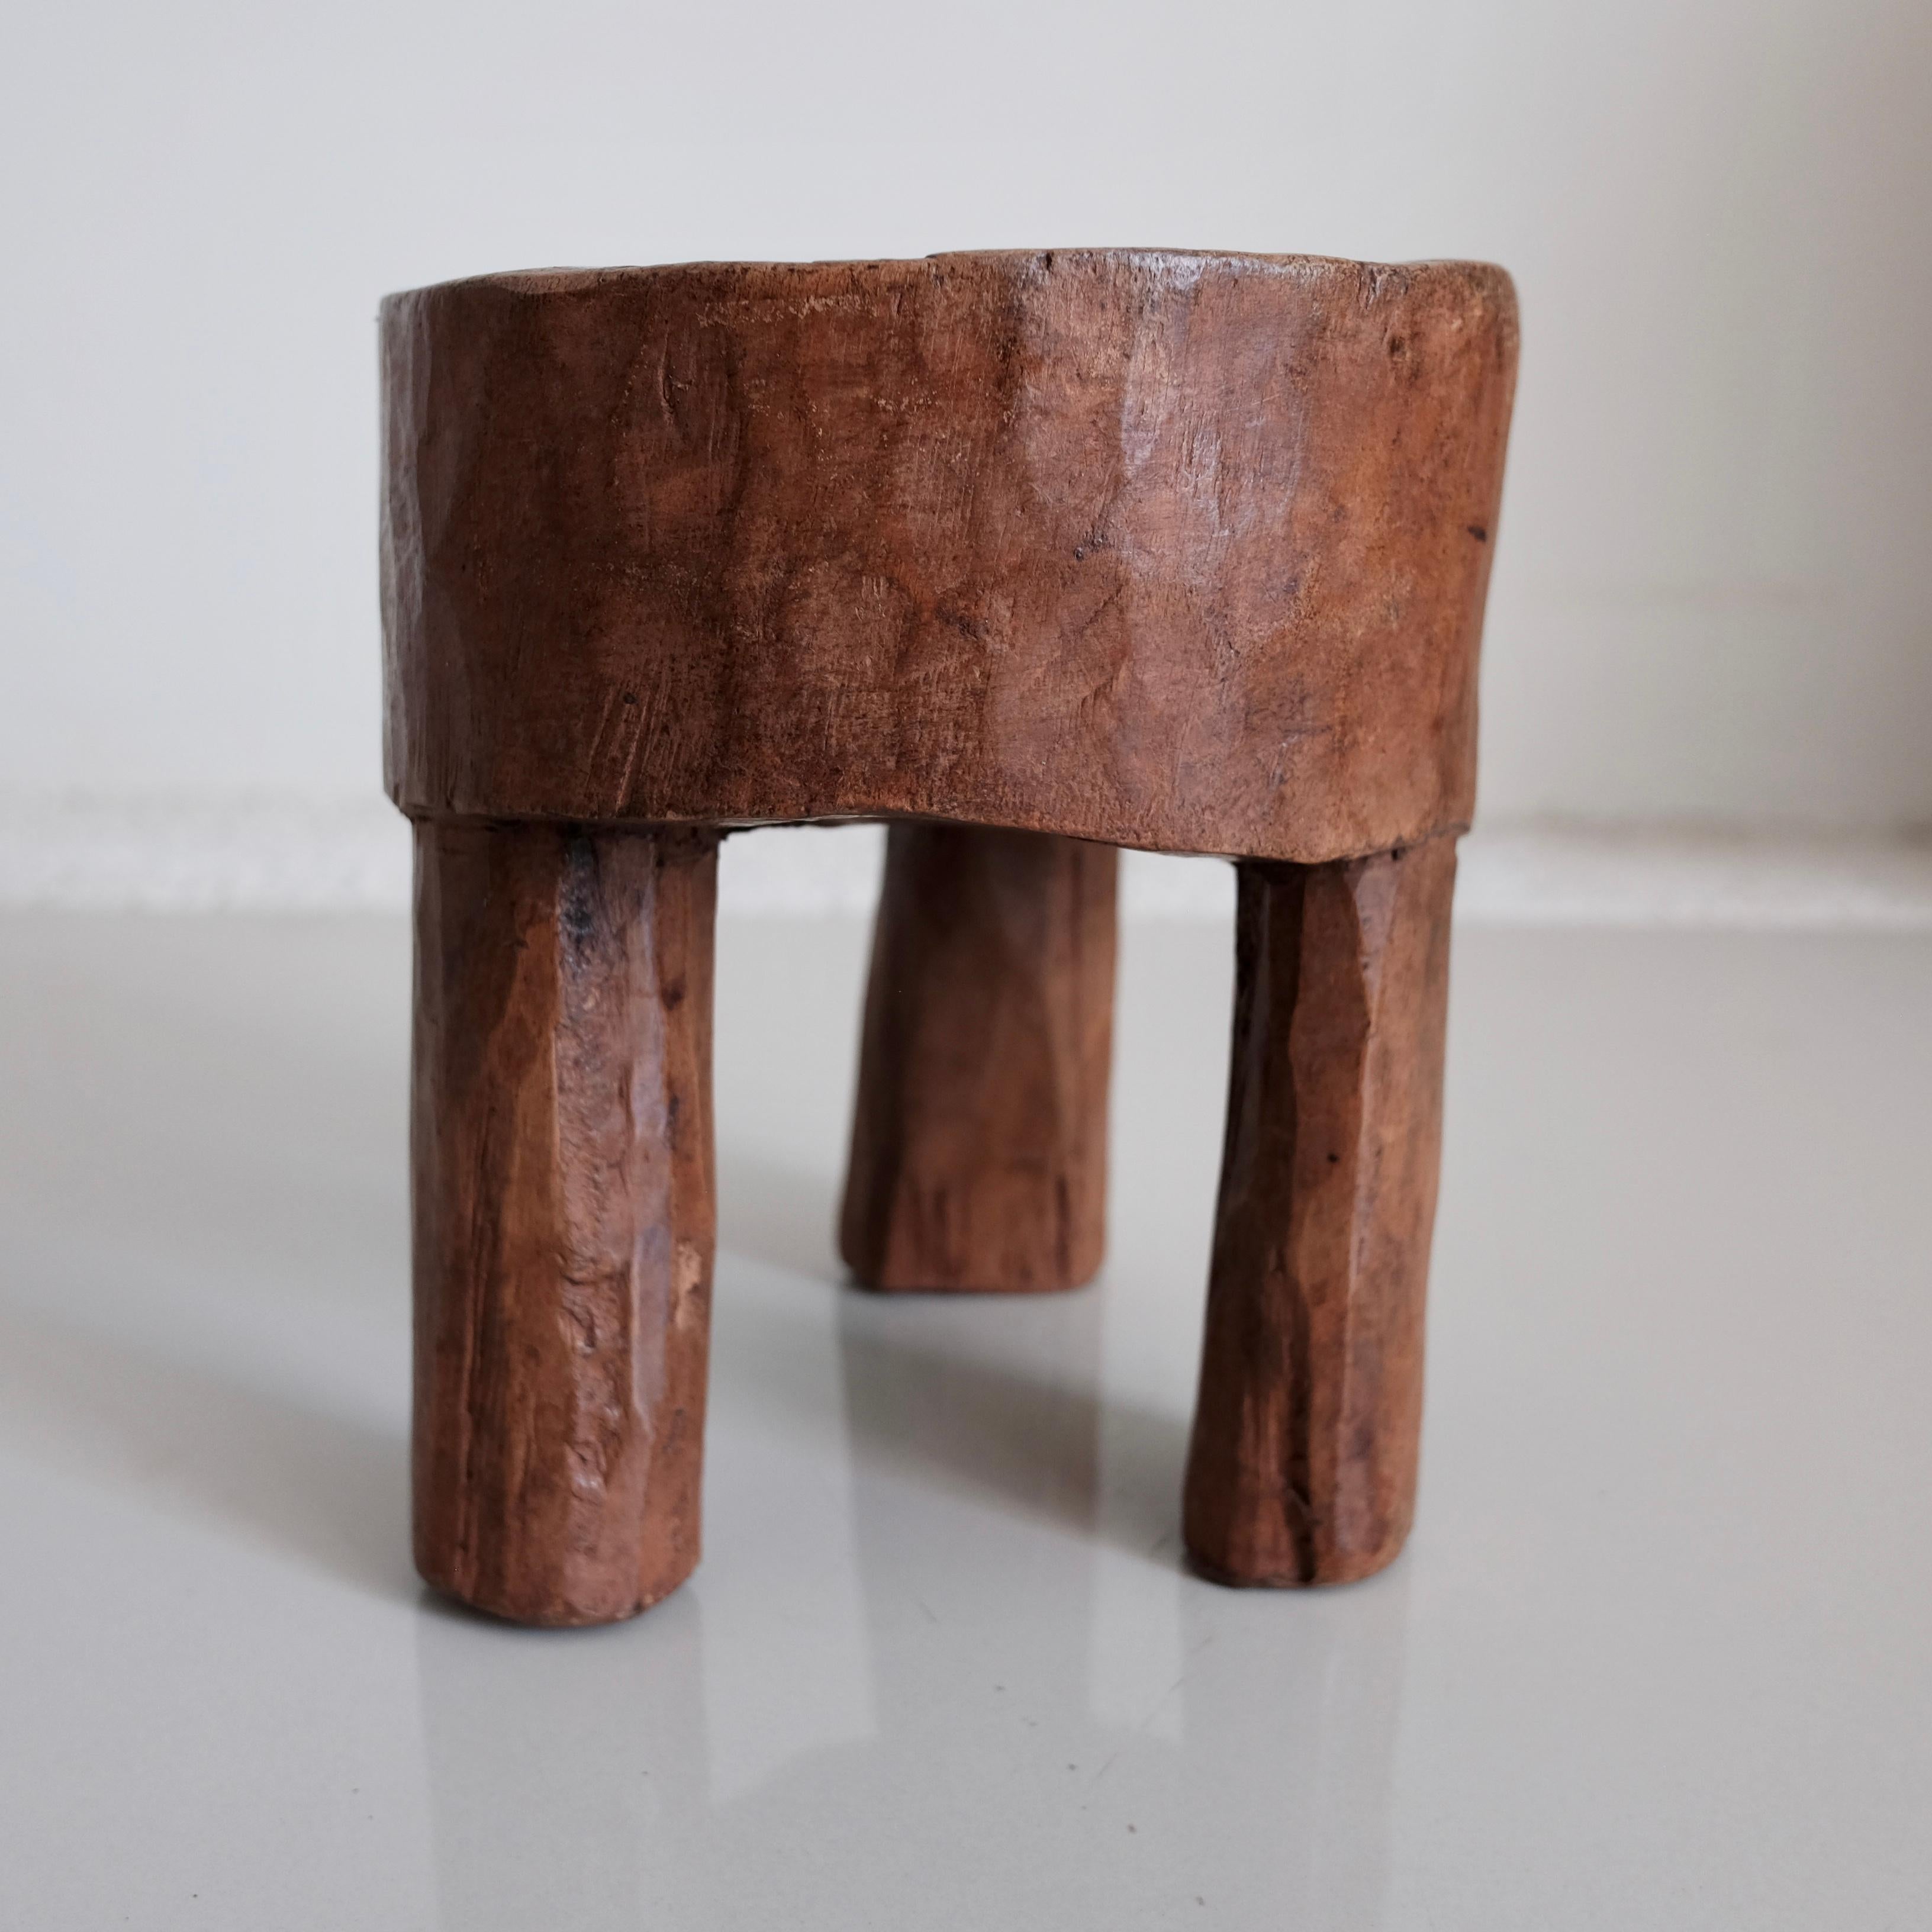 Late 20th Century Primitive Low Stool from the Senufo tribe of Ivory Coast